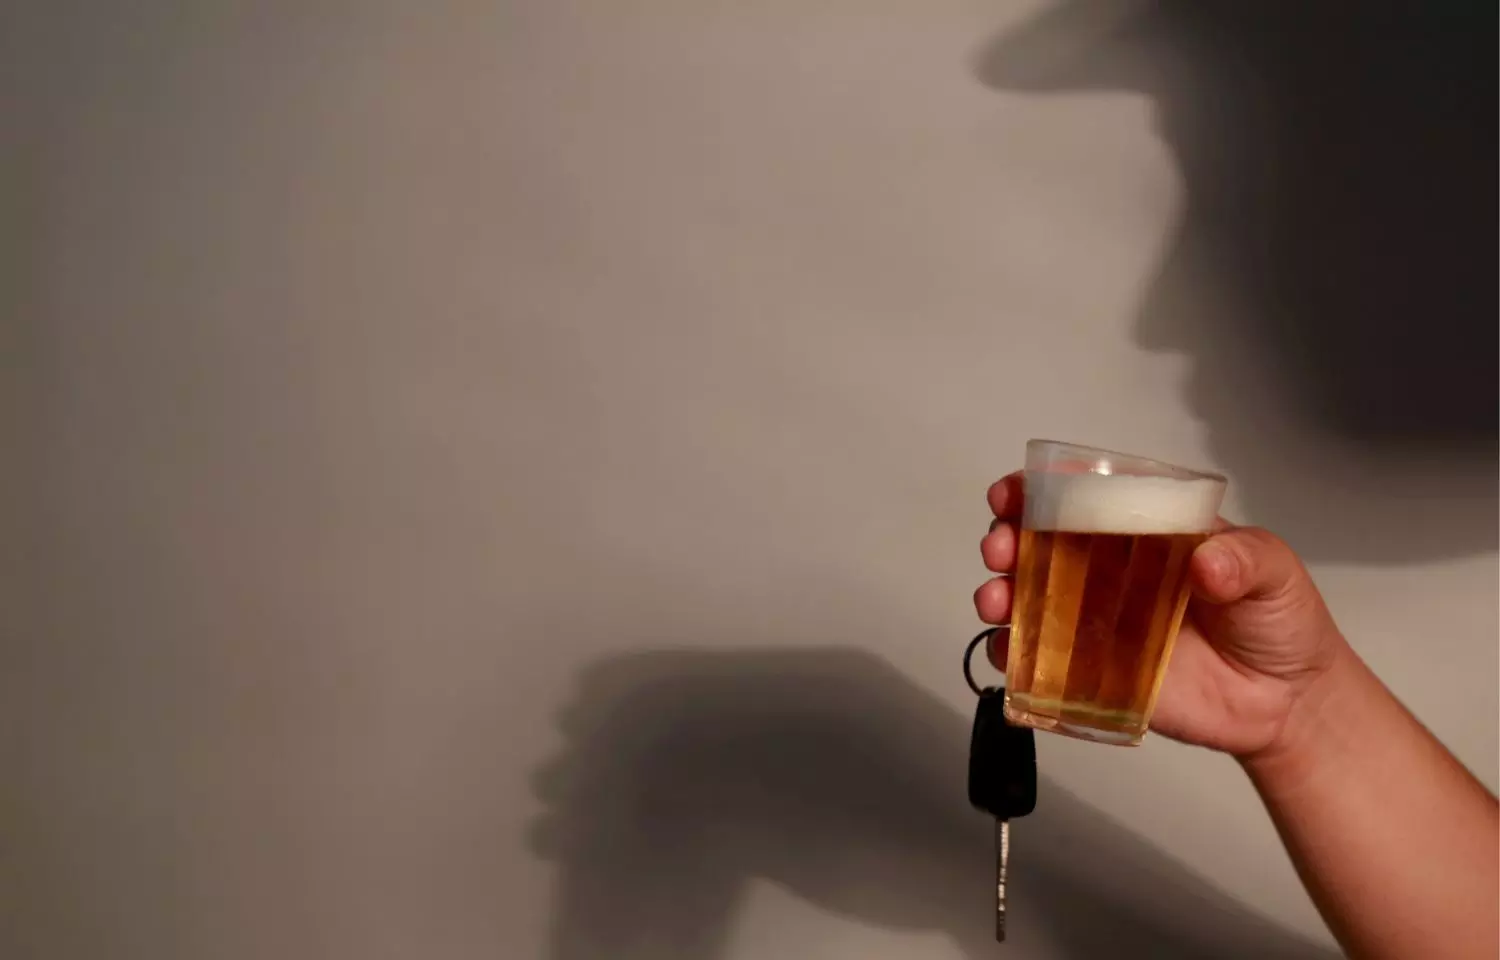 Alcohol consumption highly risky in young, small quantity may benefit some elders: Lancet